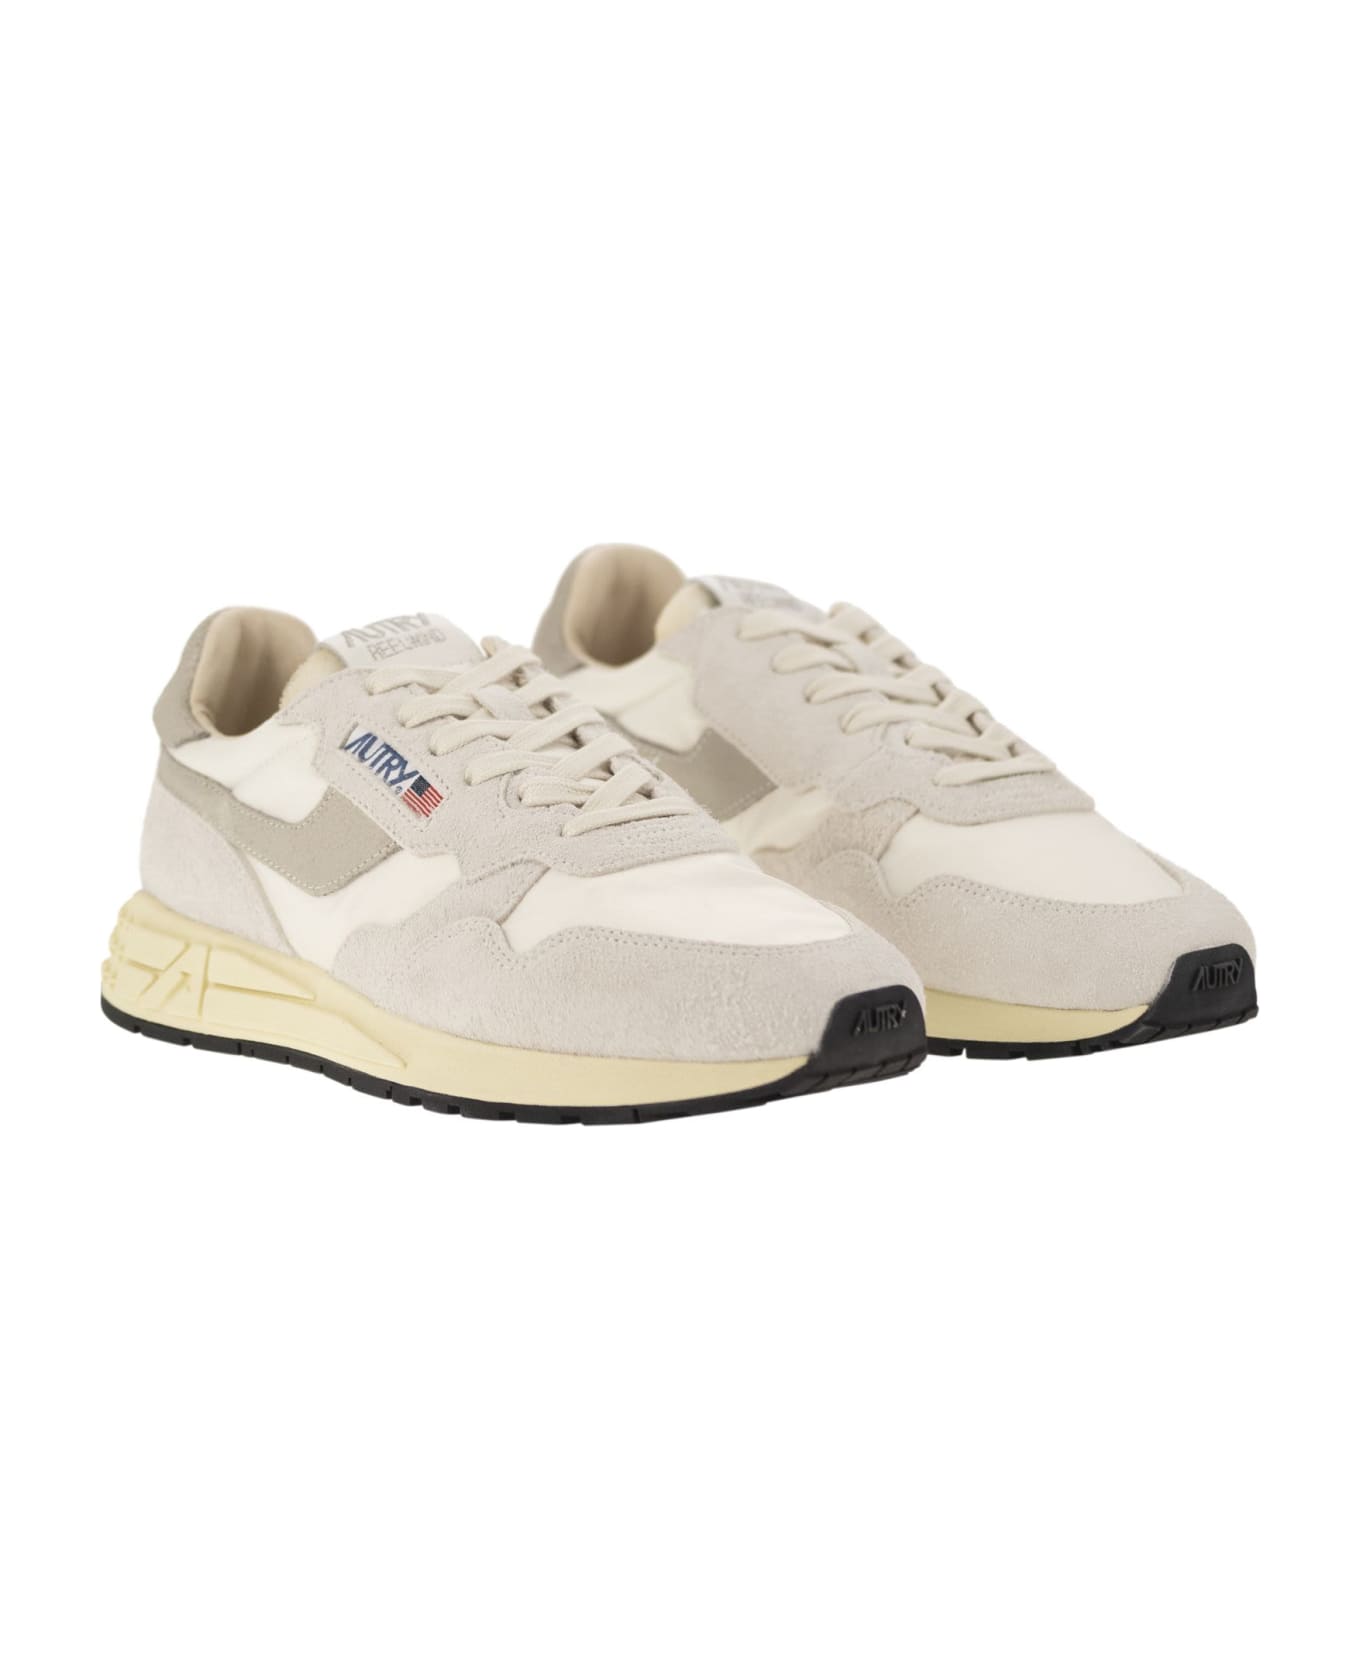 Autry Reelwind - Suede And Technical Textile Trainer - White